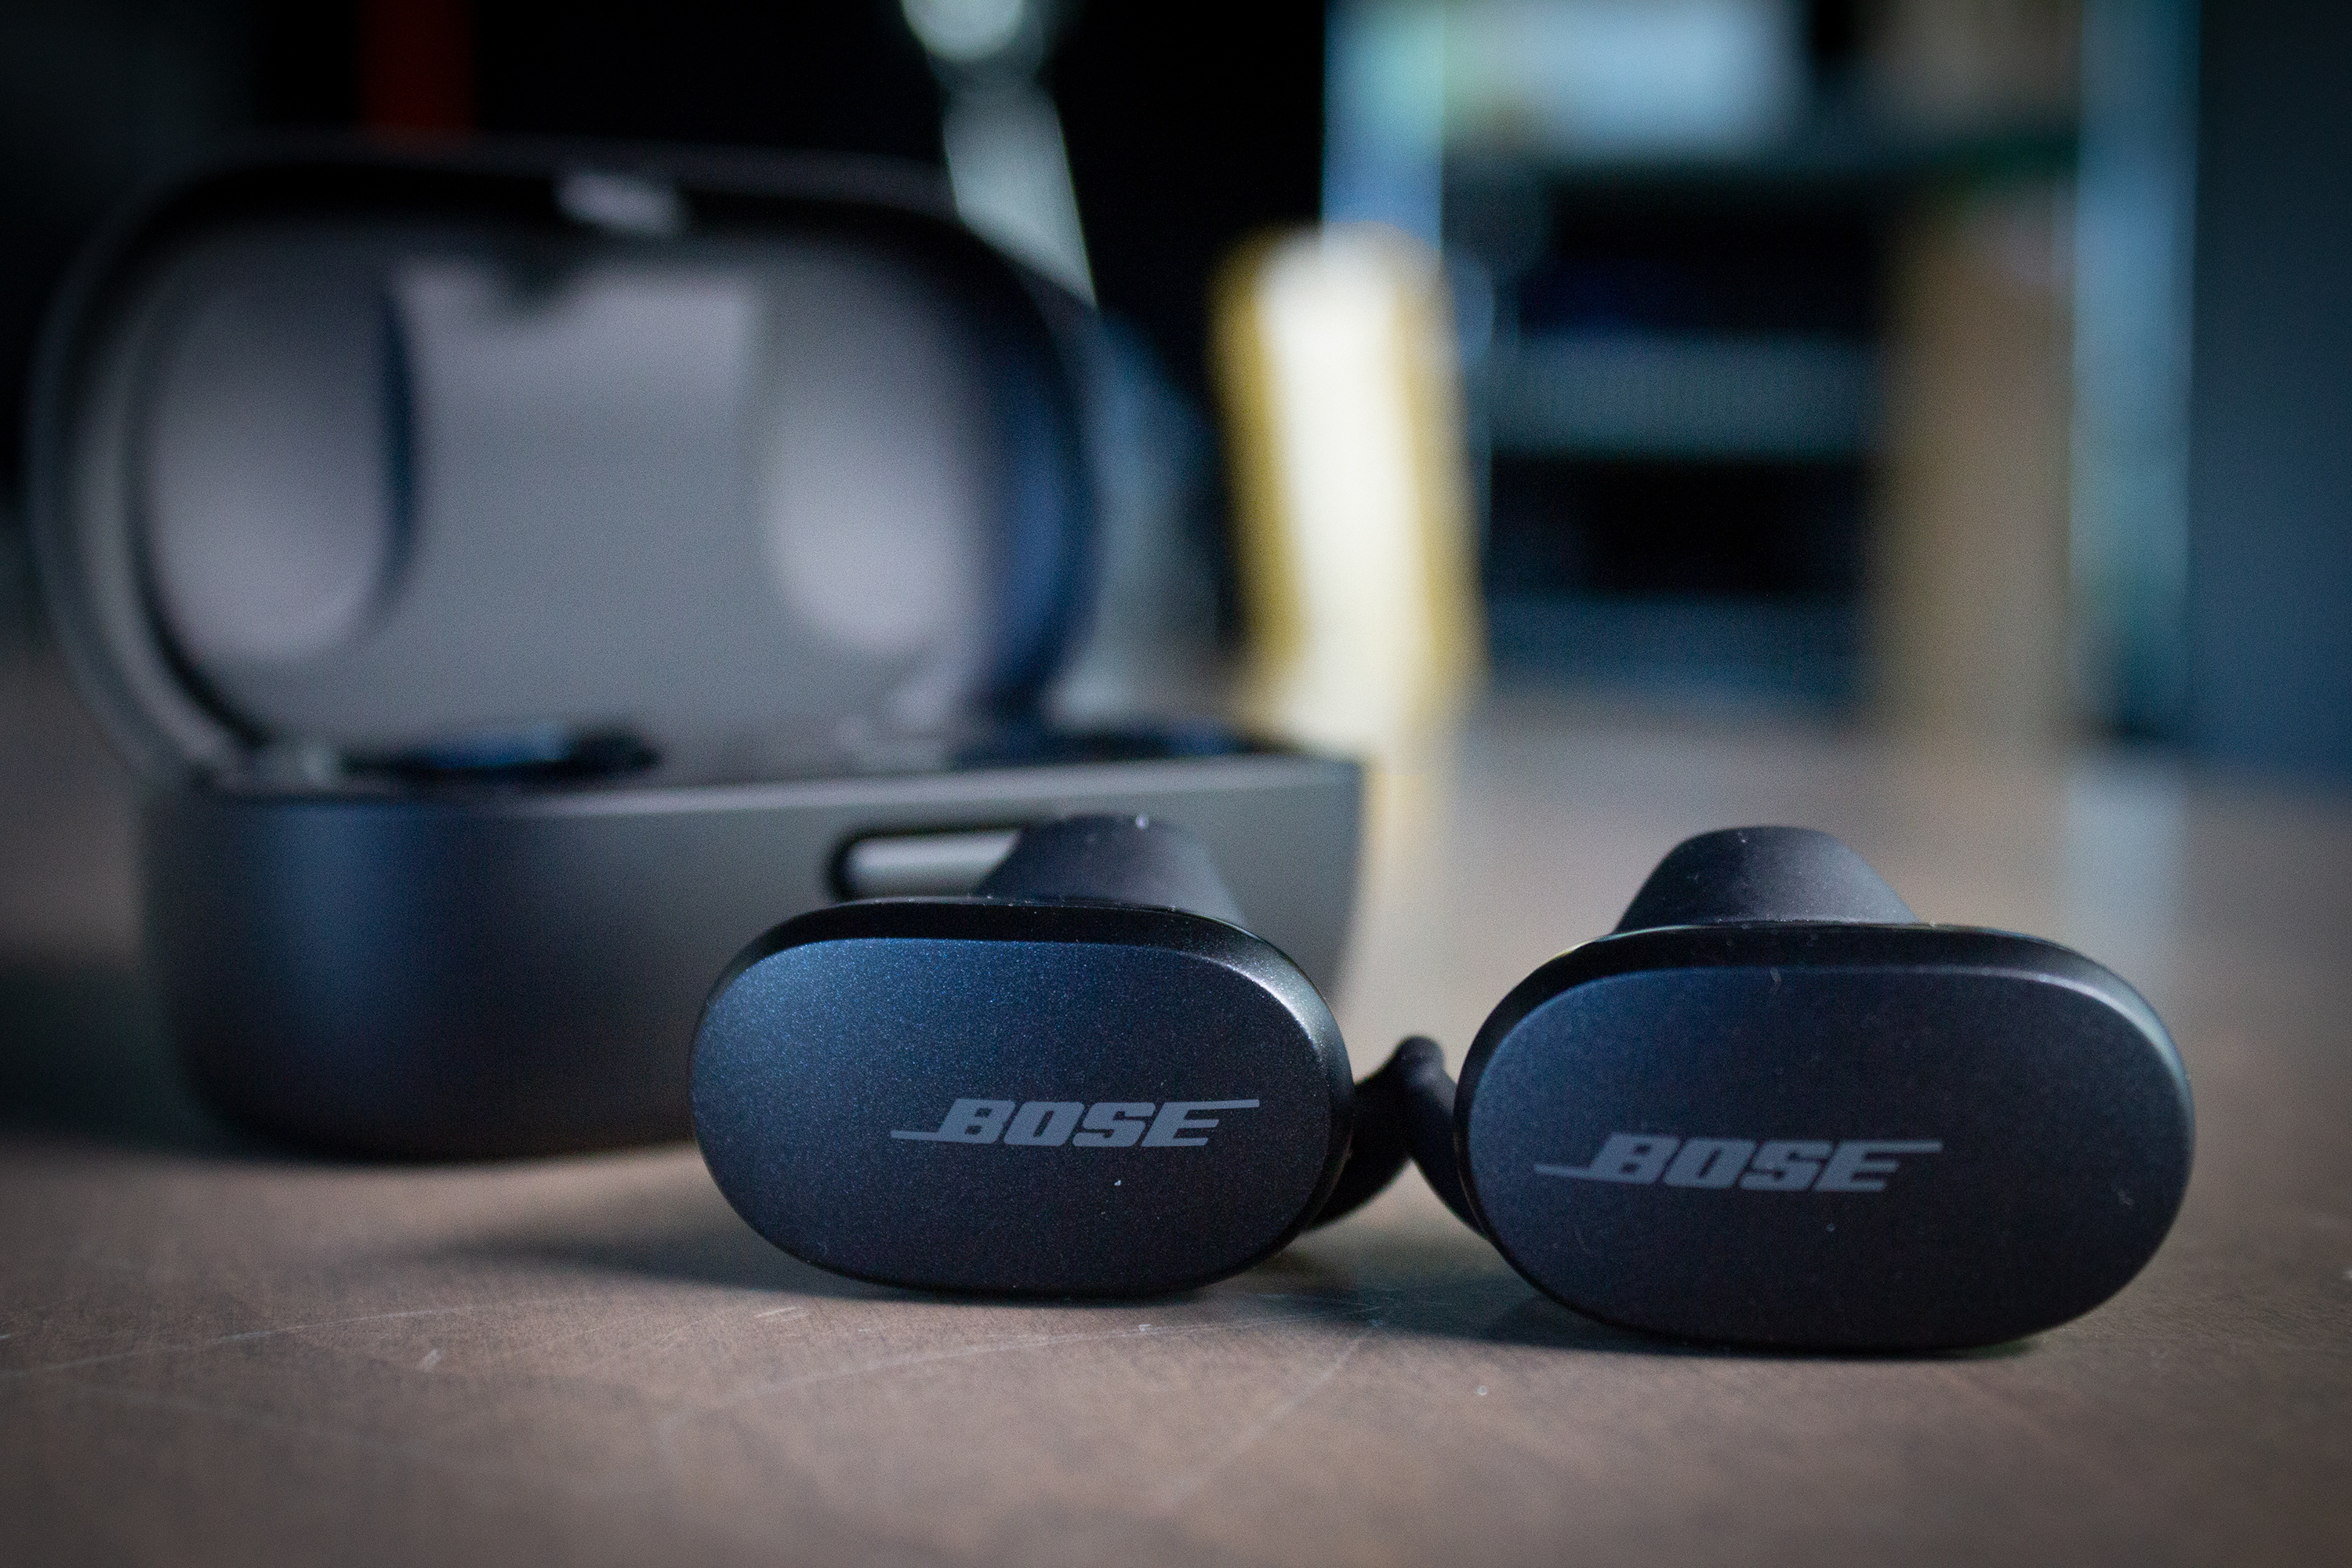 Bose earbuds on a table with logo showing and the charging case in the background